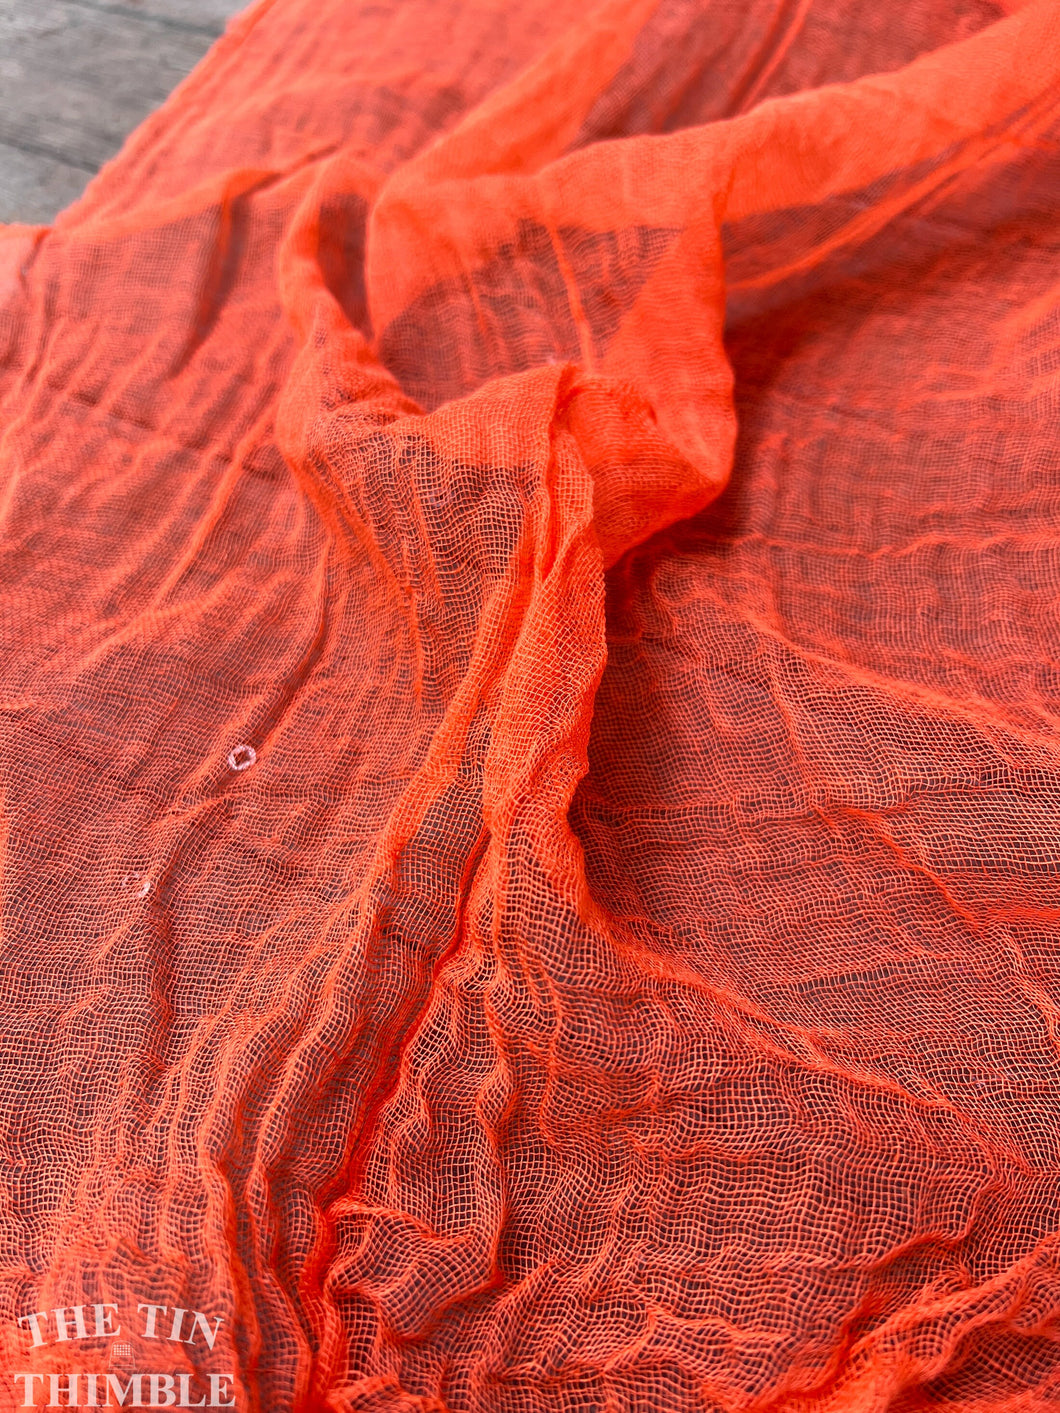 Hand Dyed Cotton Gauze Scrim Cheesecloth for Sewing or Nuno Felting in Bright Orange / Scarf for Felting or Wearing as Is / By the Yard